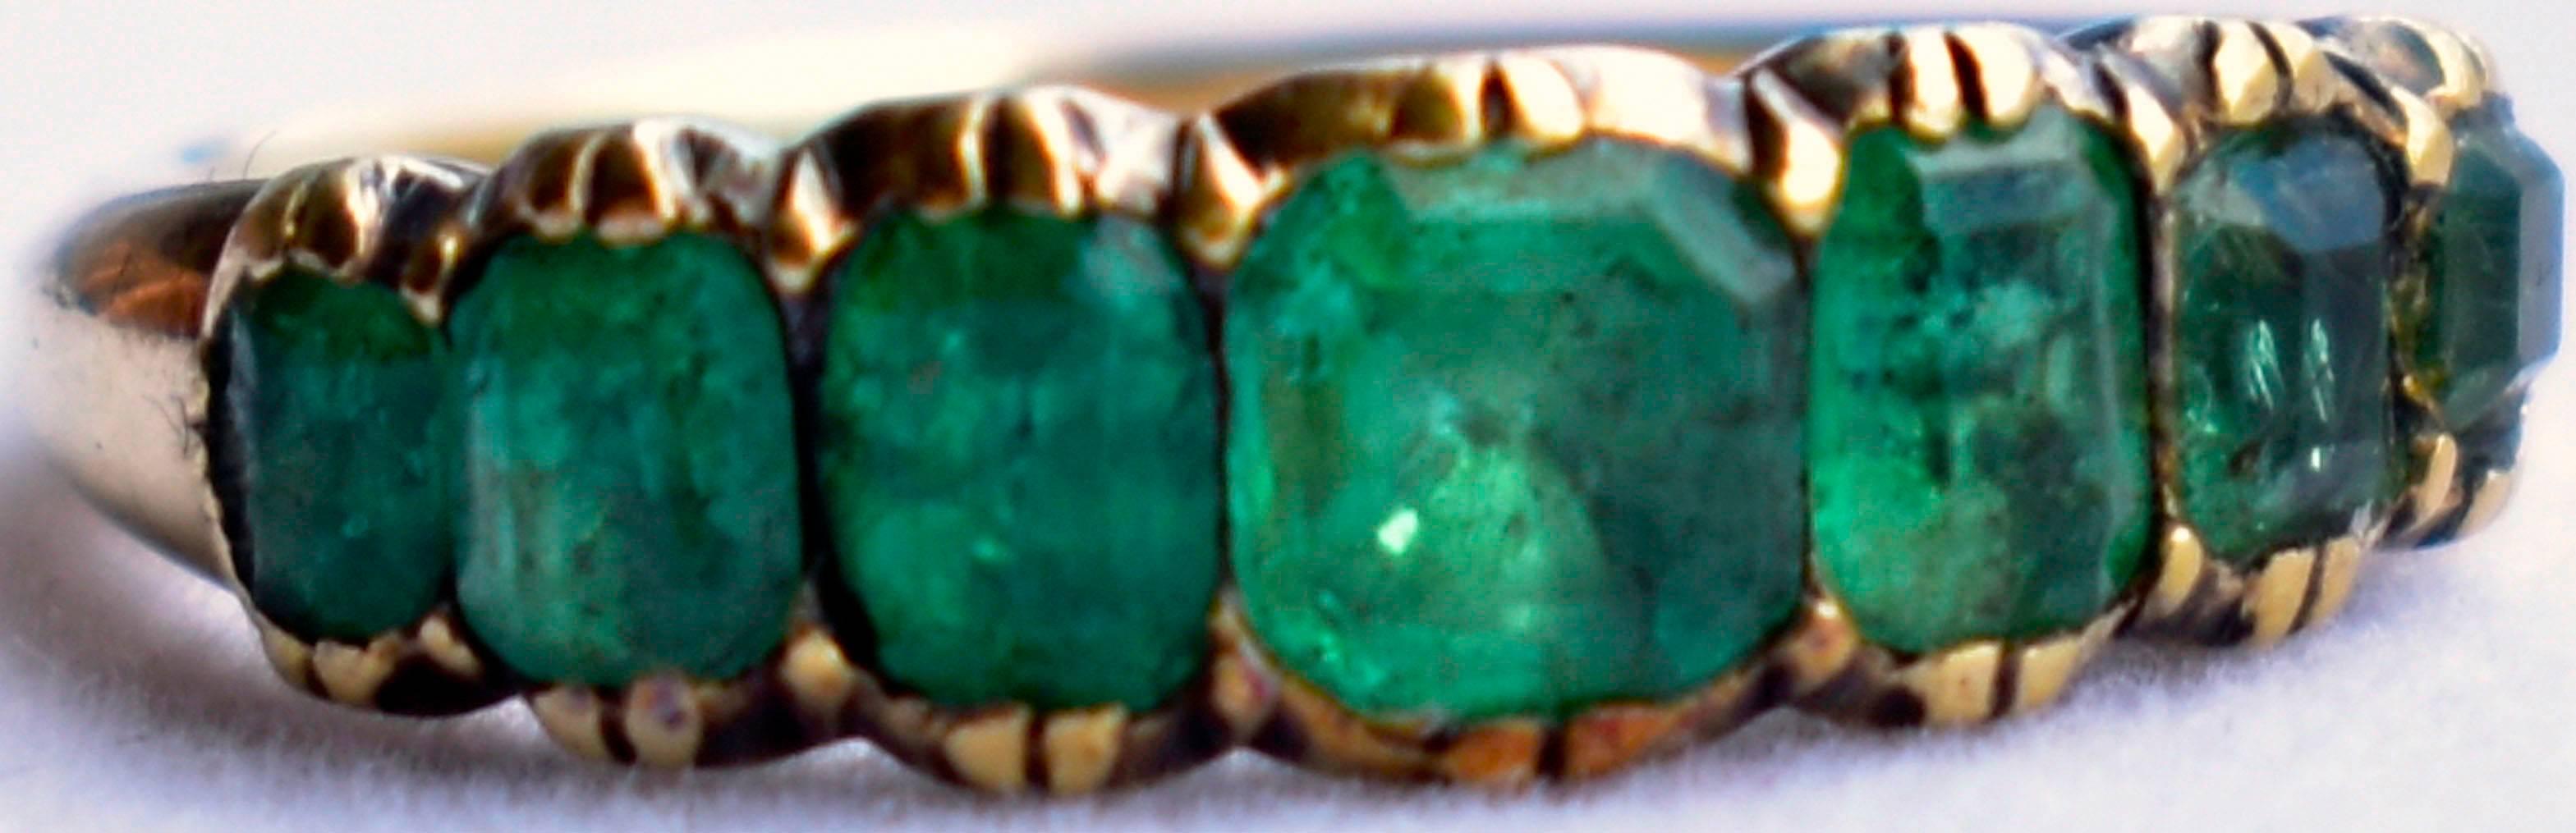 Lovely Georgian seven stone emerald ring set in 18K gold. Wonderful to wear alone or stacked with other stone band rings. This ring dates to c. 1800 and is a size 7.